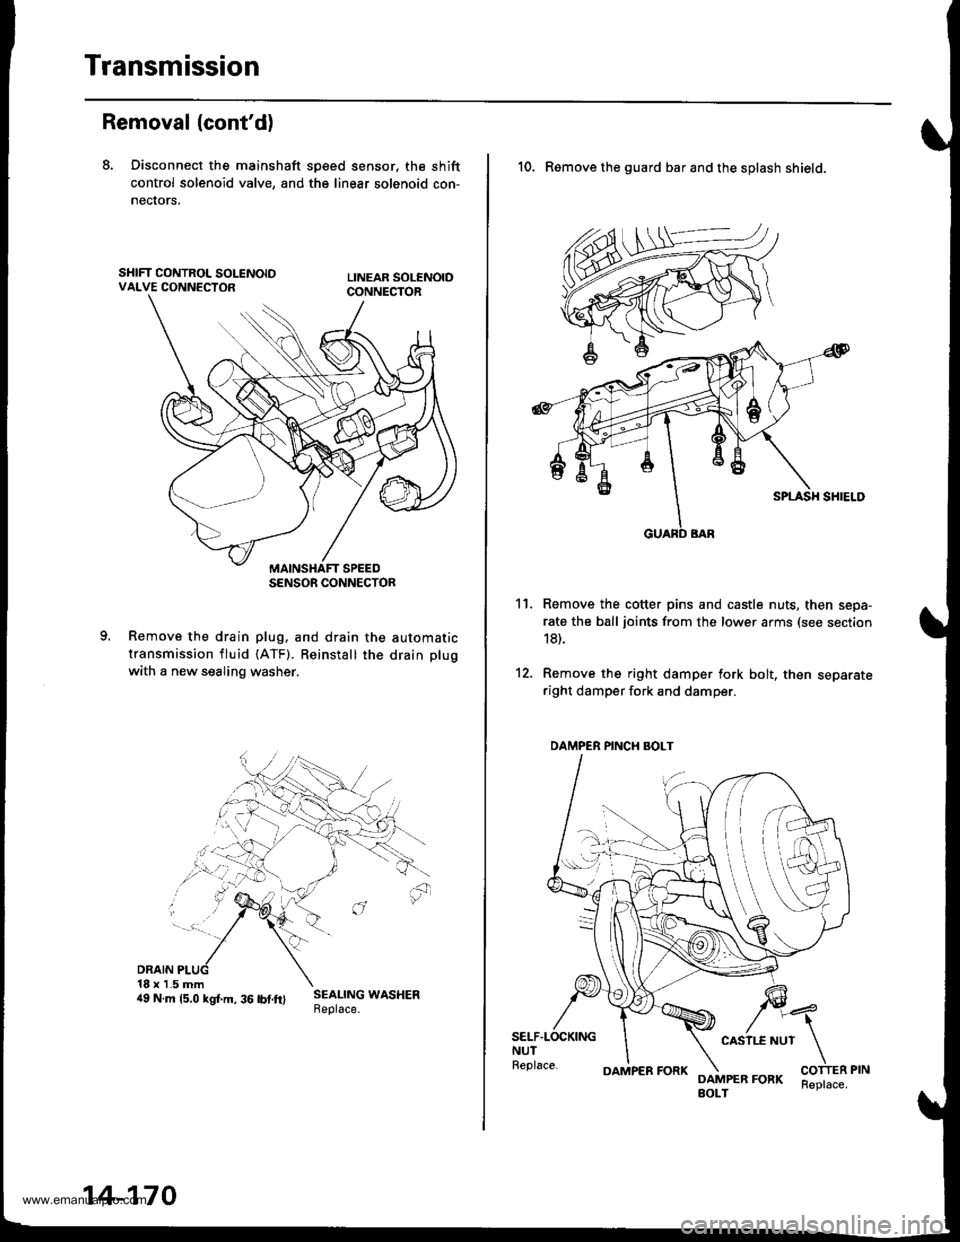 HONDA CR-V 1997 RD1-RD3 / 1.G Workshop Manual 
Transmission
Removal (contd)
8. Disconnect the mainshaft sp€ed sensor, the shift
control solenoid valve, and the linear solenoid con-
necrors,
Remove the drain plug. and drain the automatic
transm